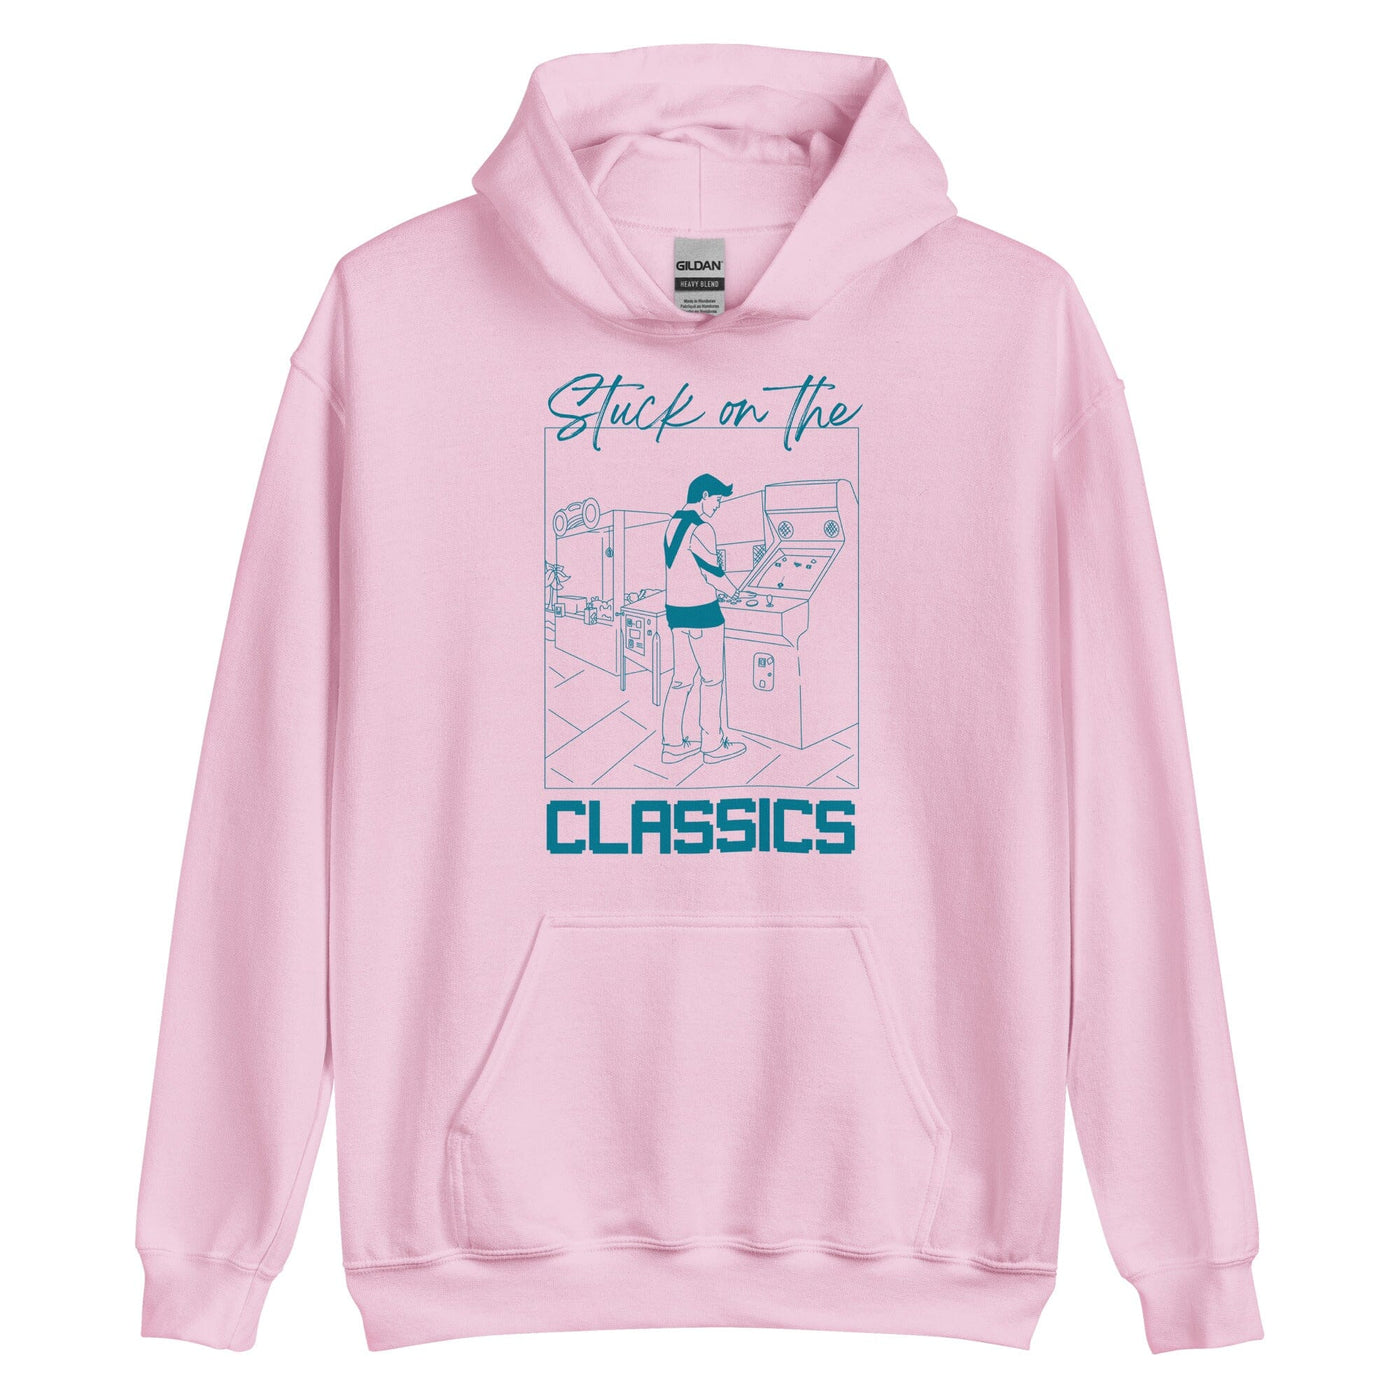 Stuck on the Classics | Unisex Hoodie | Retro Gaming Threads & Thistles Inventory Light Pink S 